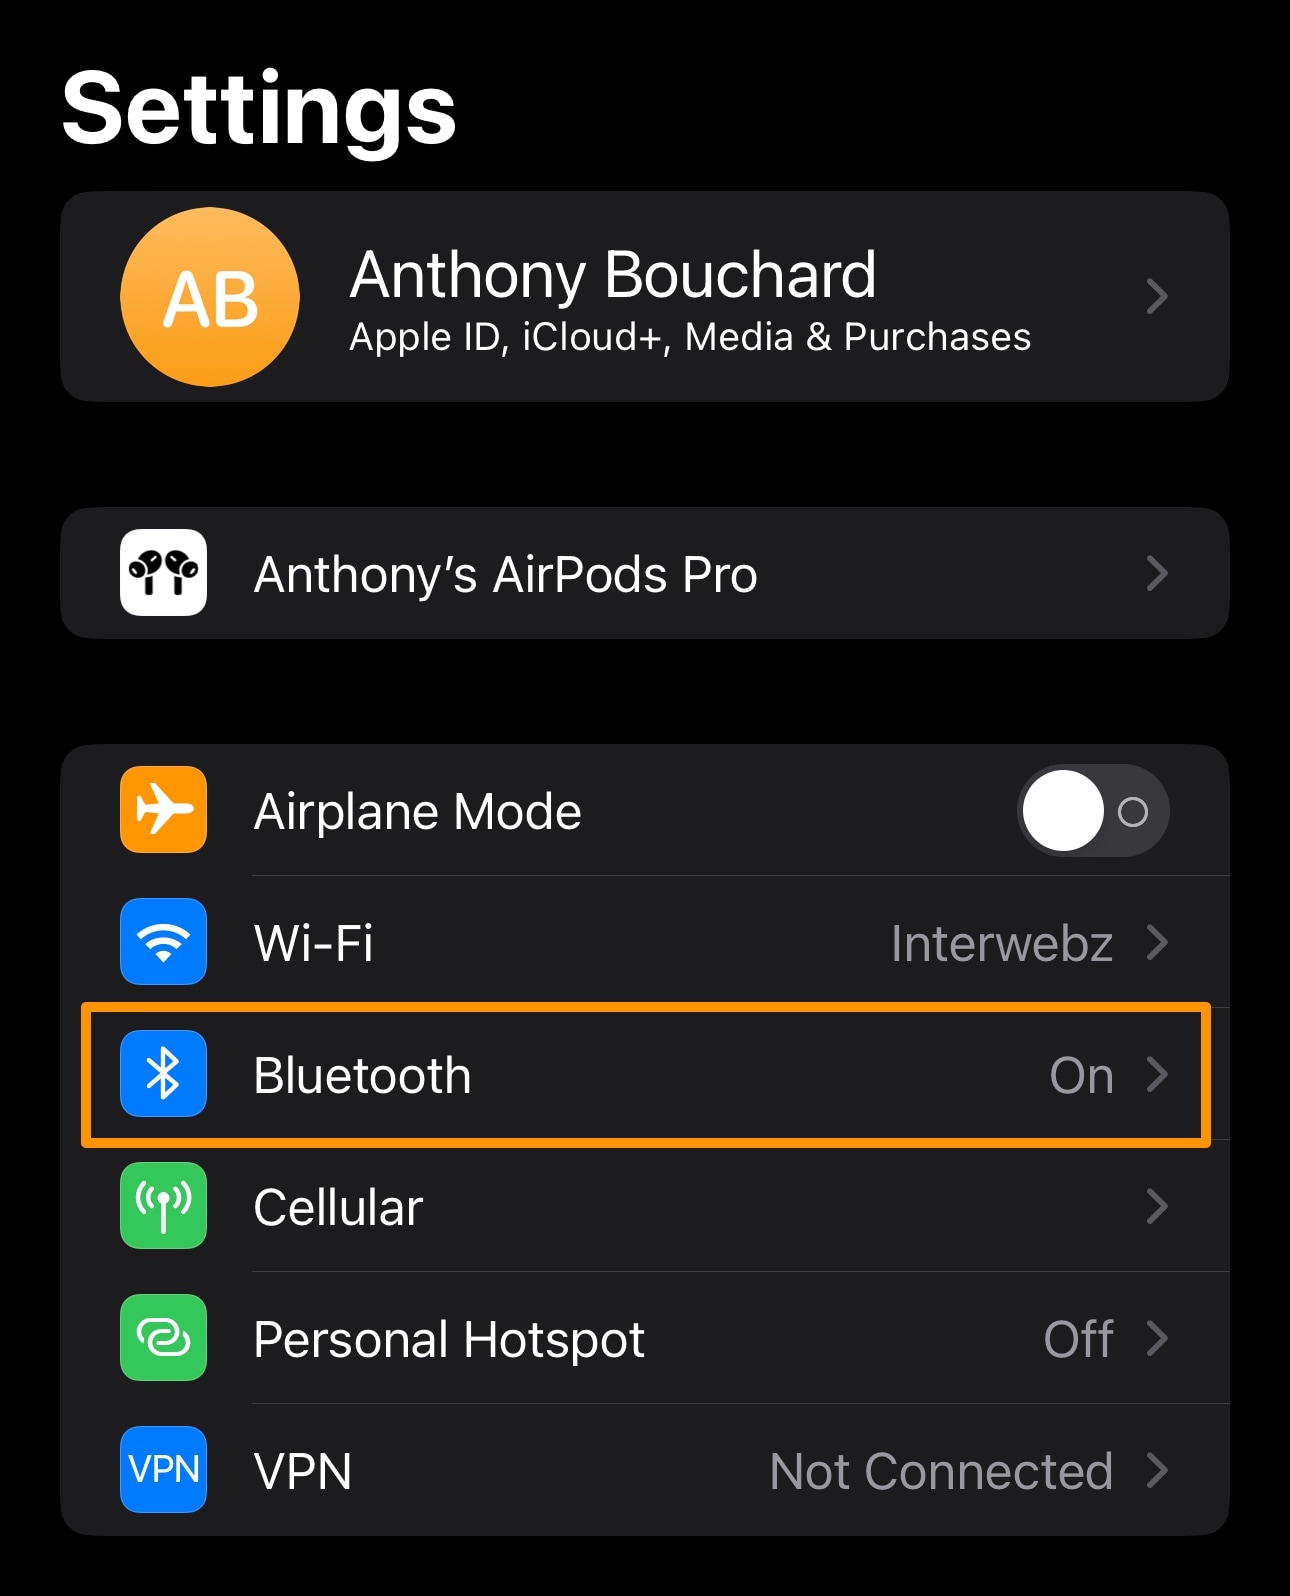 Open iPhone's Bluetooth preference pane to pair your Nintendo Switch Pro Controller.